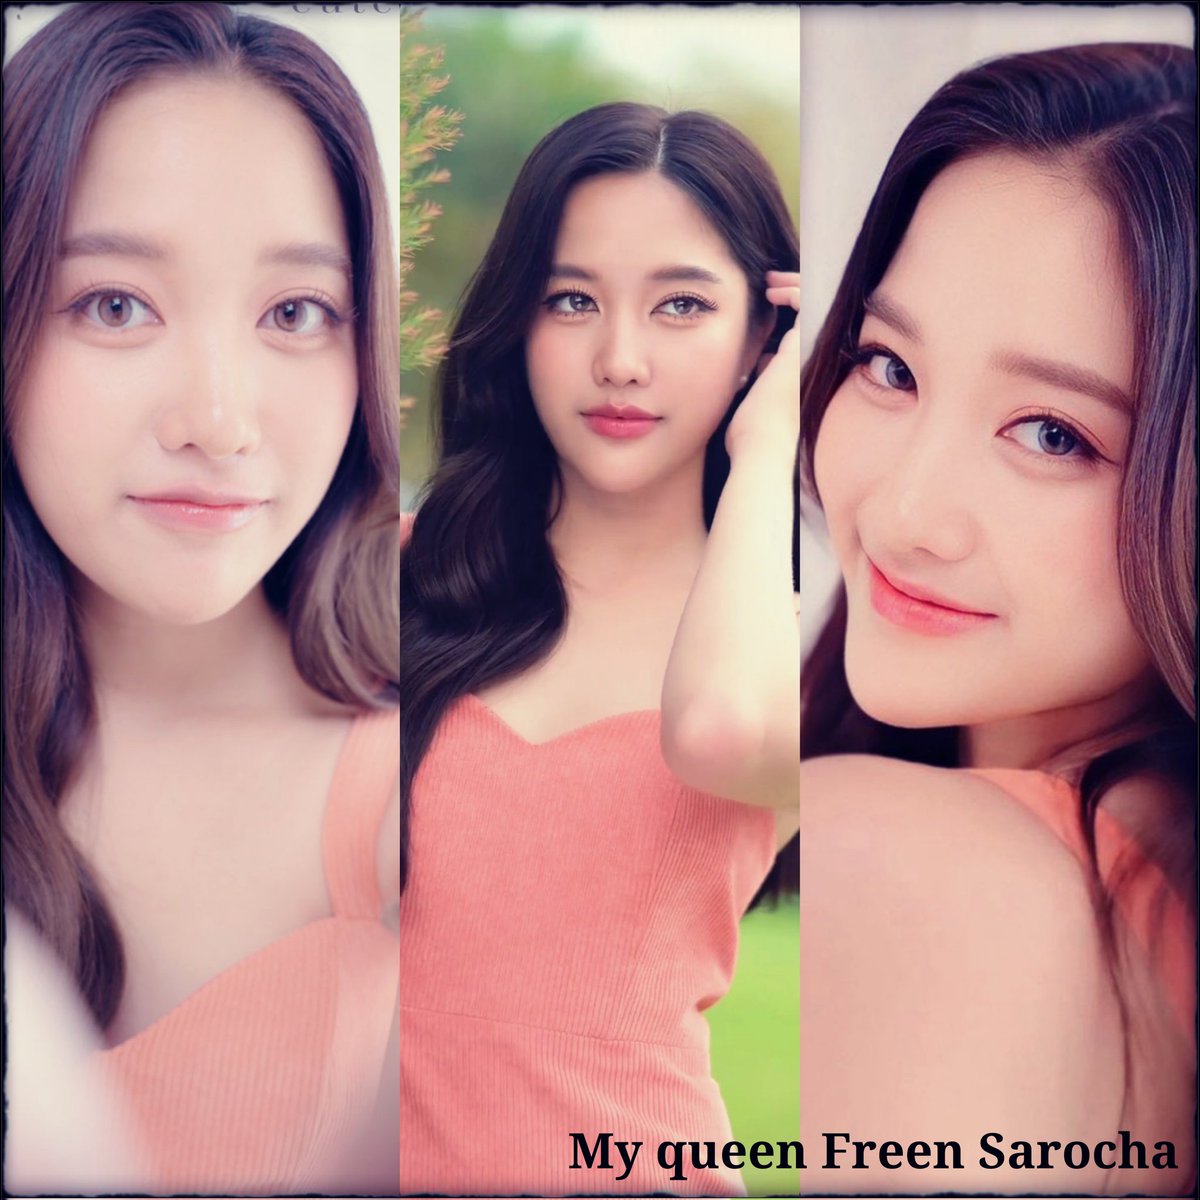 Thank you, Cutepress The best presenter, she is wonderful. Thank you. We always support her and are enthusiastic volg 2 And the big surprise 🫢 😊😊💗😘🤍

#srchafreen #GIRLFREEN
#CutepressCiLabxFreen 
#ซีแล็บกันแดดคุมมัน